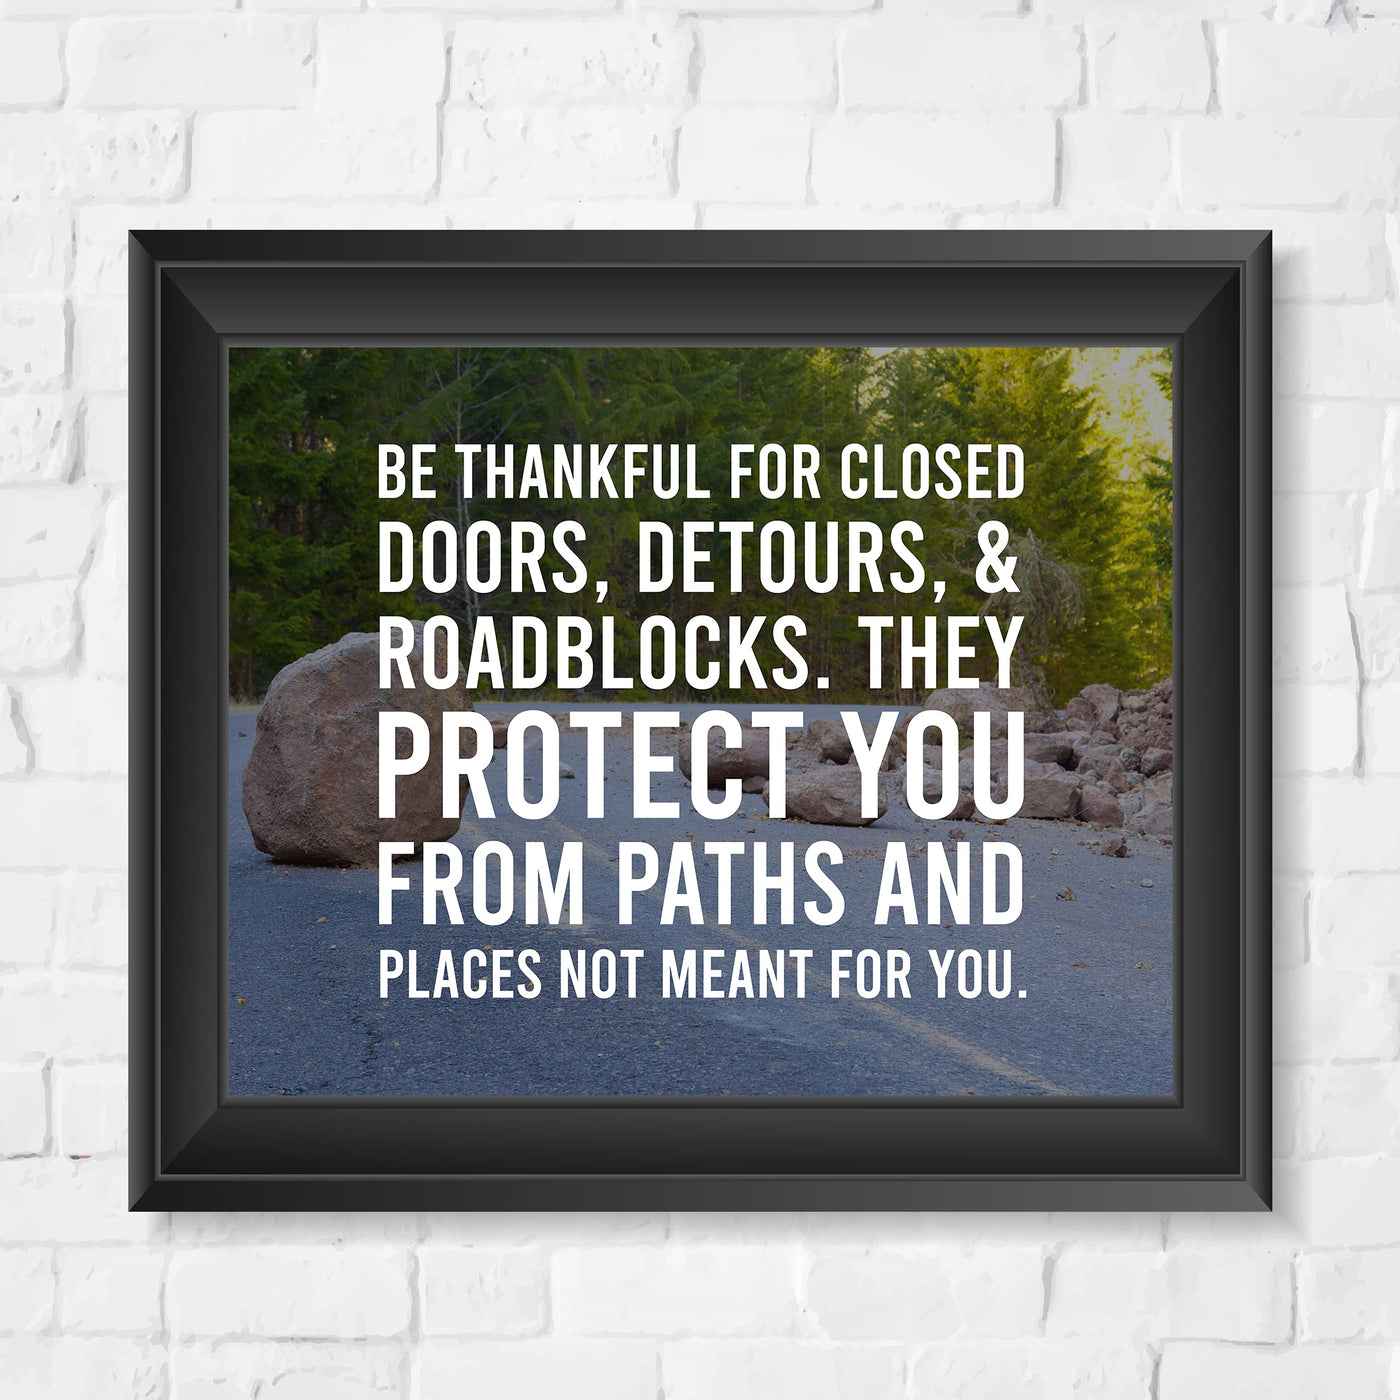 Be Thankful for Detours-They Protect You Inspirational Quotes Wall Art -10 x 8" Roadblock Photo Print-Ready to Frame. Motivational Decor for Home-Office-Classroom-Dorm. Great Positive Gift!